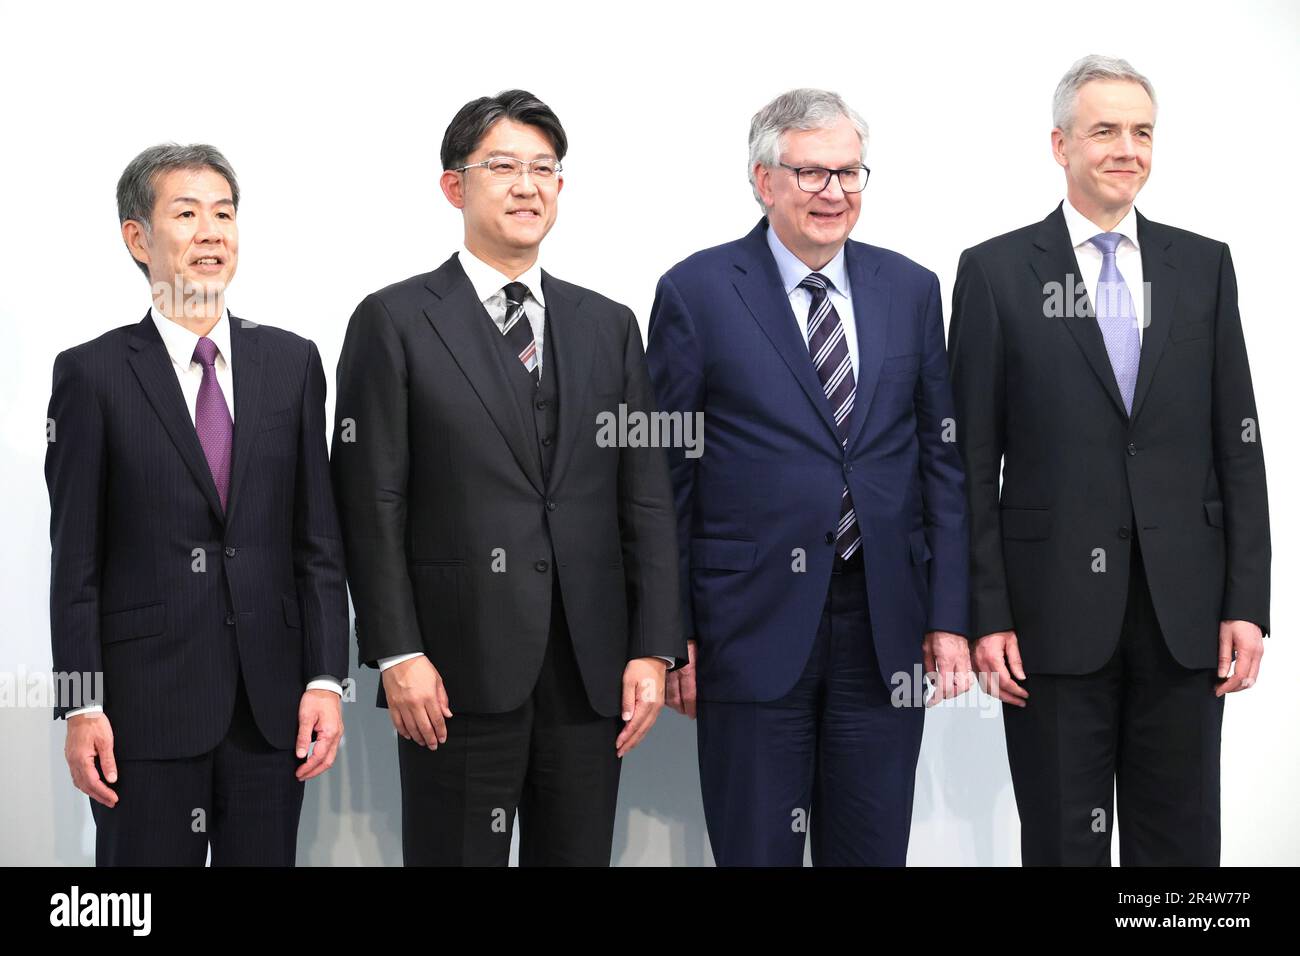 Tuesday. 30th May, 2023. Tokyo, Japan. 30th May, 2023. (L-R) Japan's Hino Motors CEO Satoshi Ogiso, Toyota Motor CEO Koji Sato, Germany's Daimler Truck CEO Martin Daum and Daimler's subsidiary MFTBC (Mitsubishi Fuso) CEO Karl Depper pose for photo as they announced Hino and MFTBC will merge their businesses and Toyota and Daimler Truck will form a holding company at a press conference in Tokyo on Tuesday, May 30, 2023. (photo by Yoshio Tsunoda/AFLO) Stock Photo